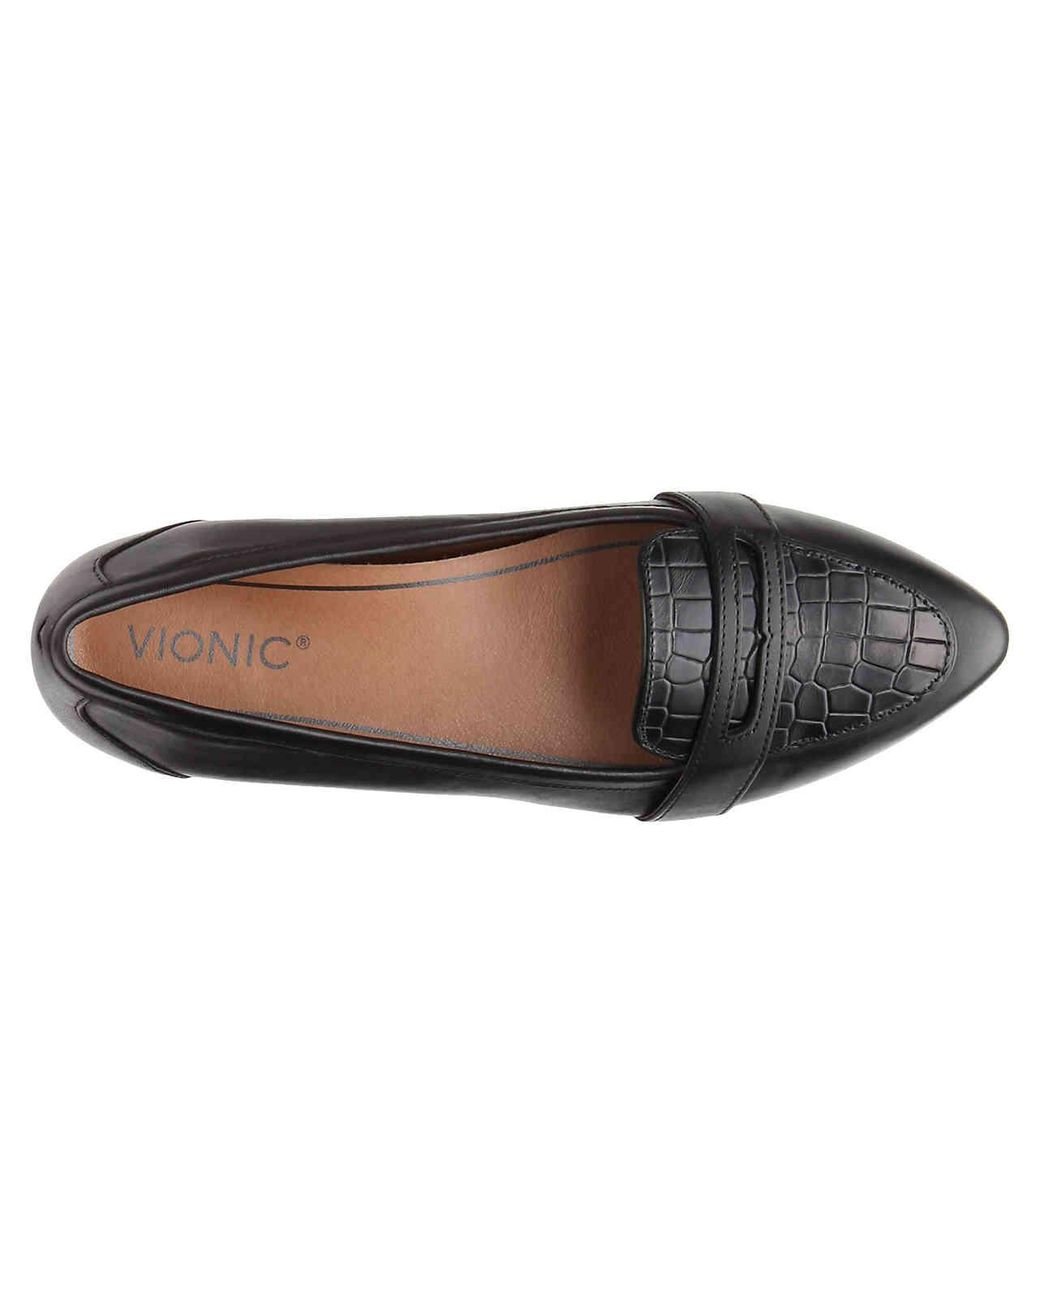 Vionic Leather Savannah Loafer in Black 